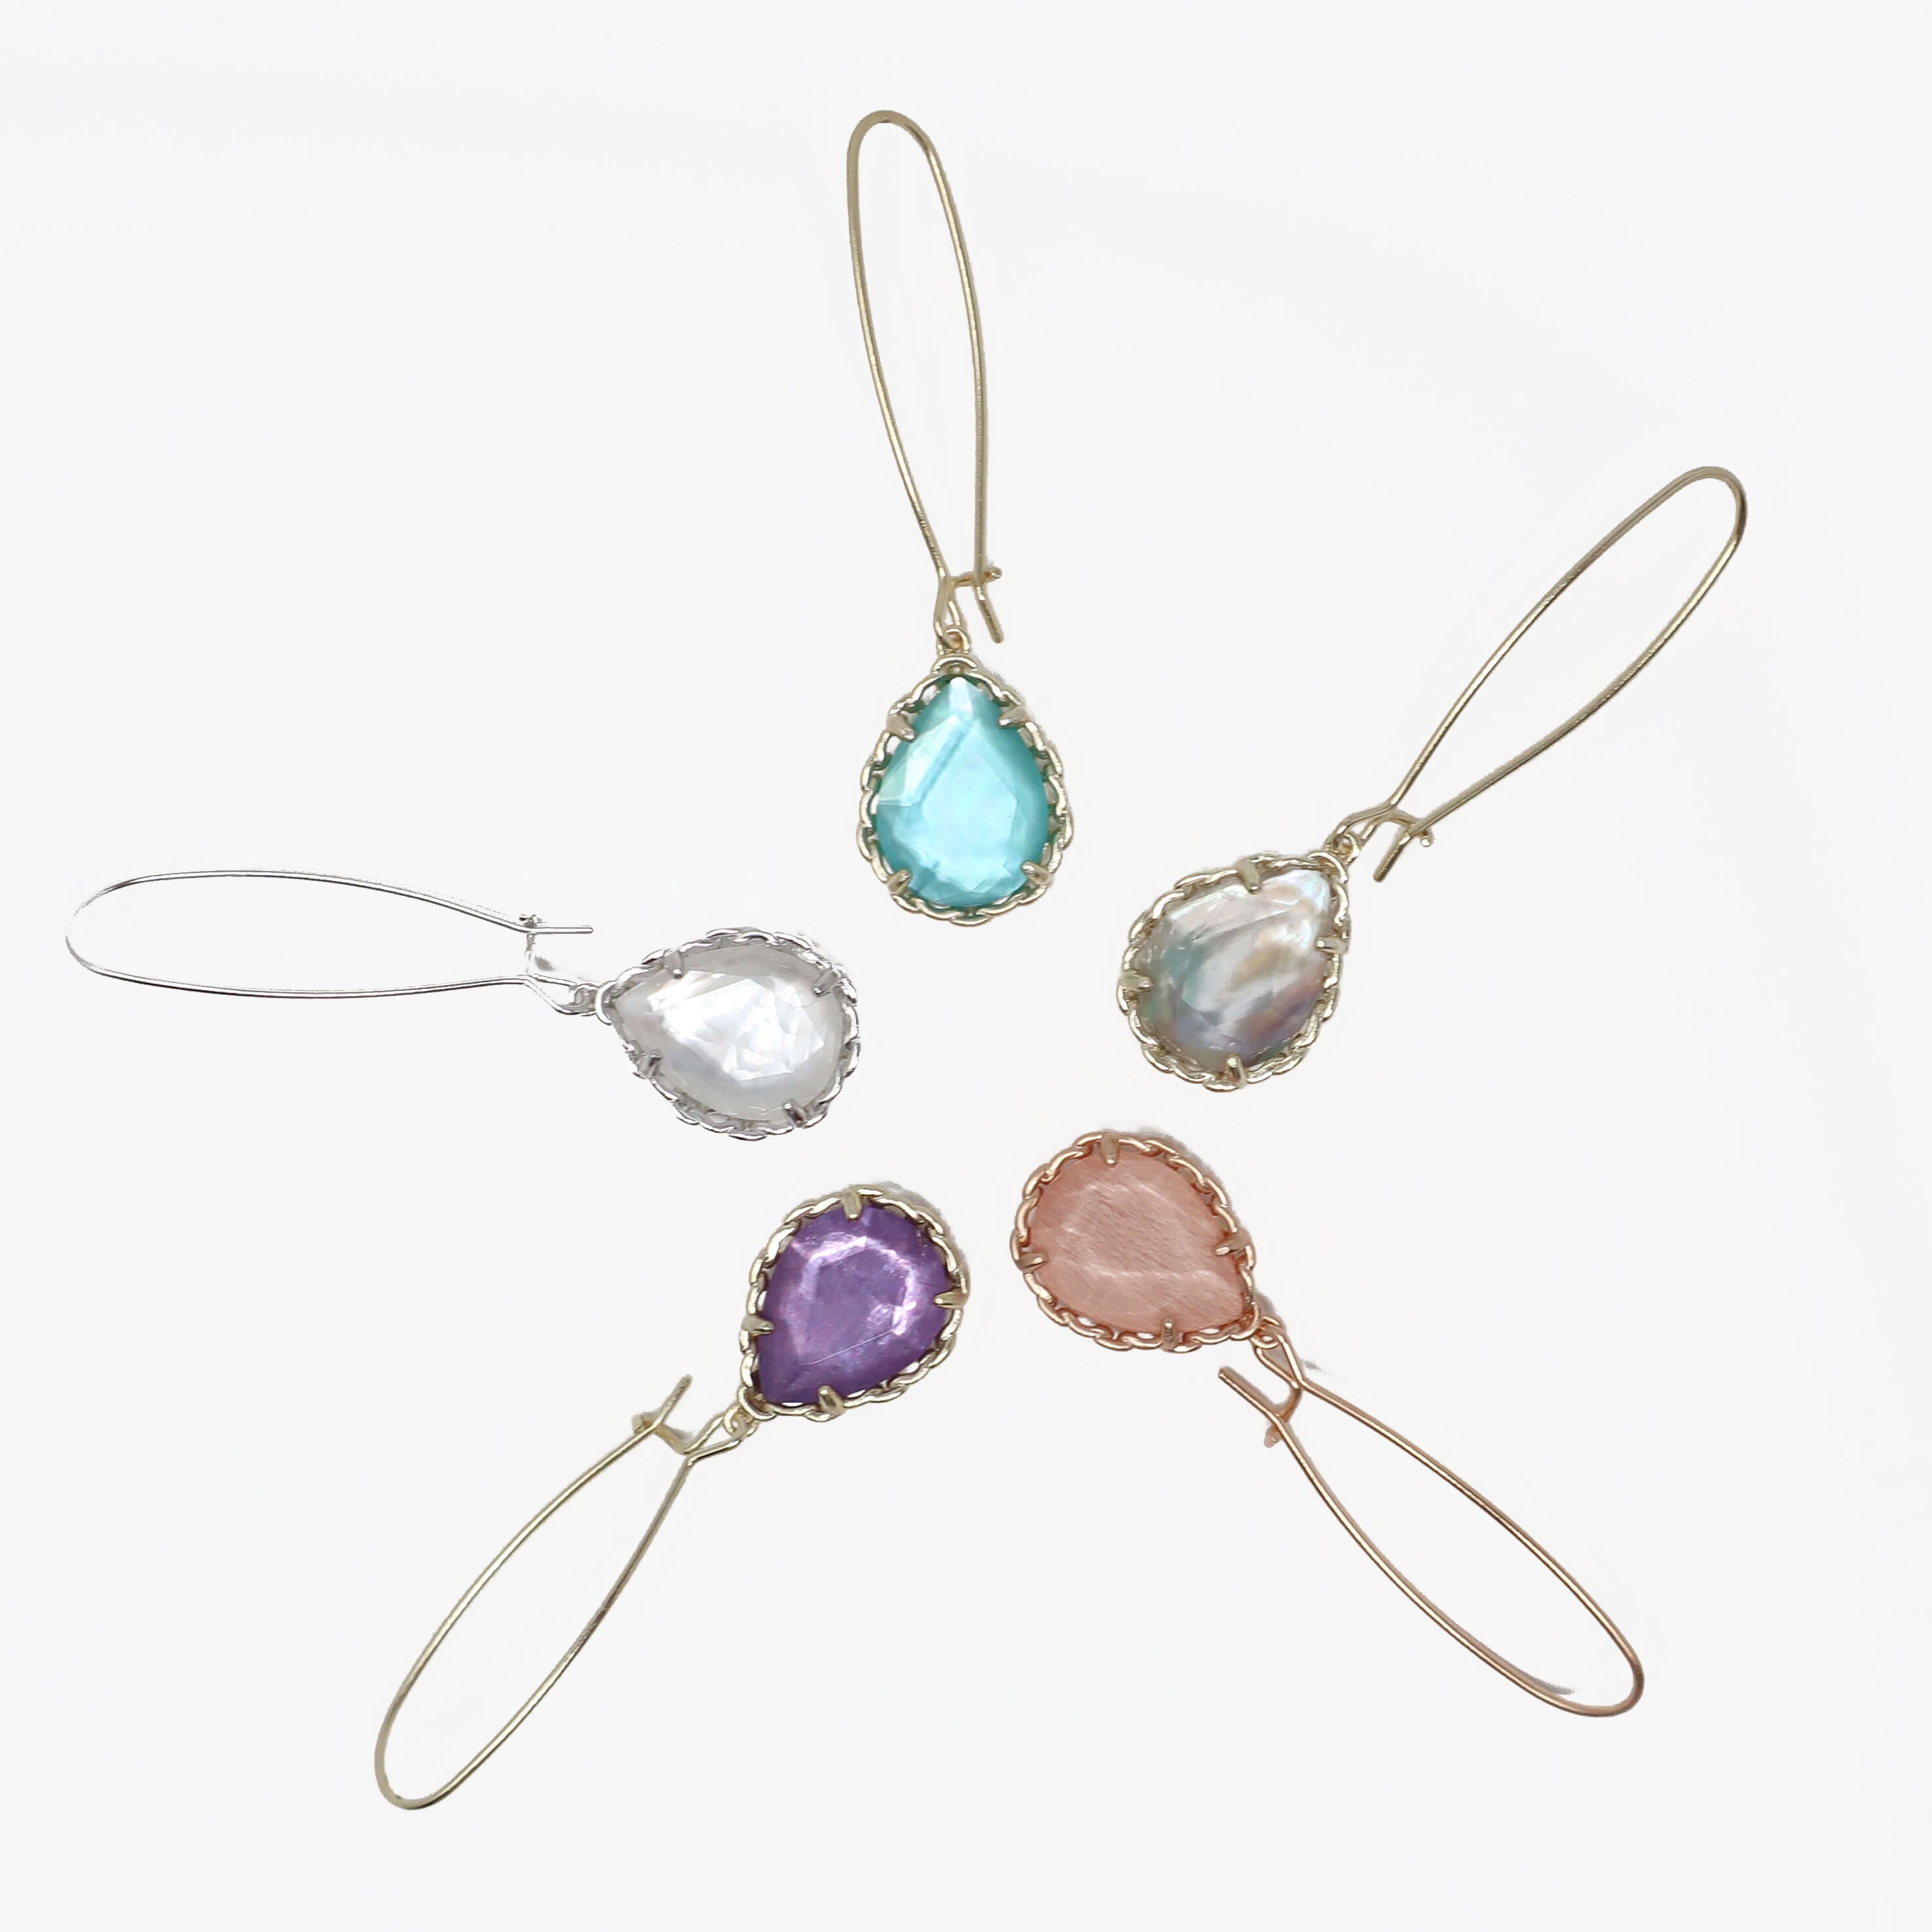 New at LavishlyHip ~ New Stones from the Kendra Scott Spring 2020 Collection